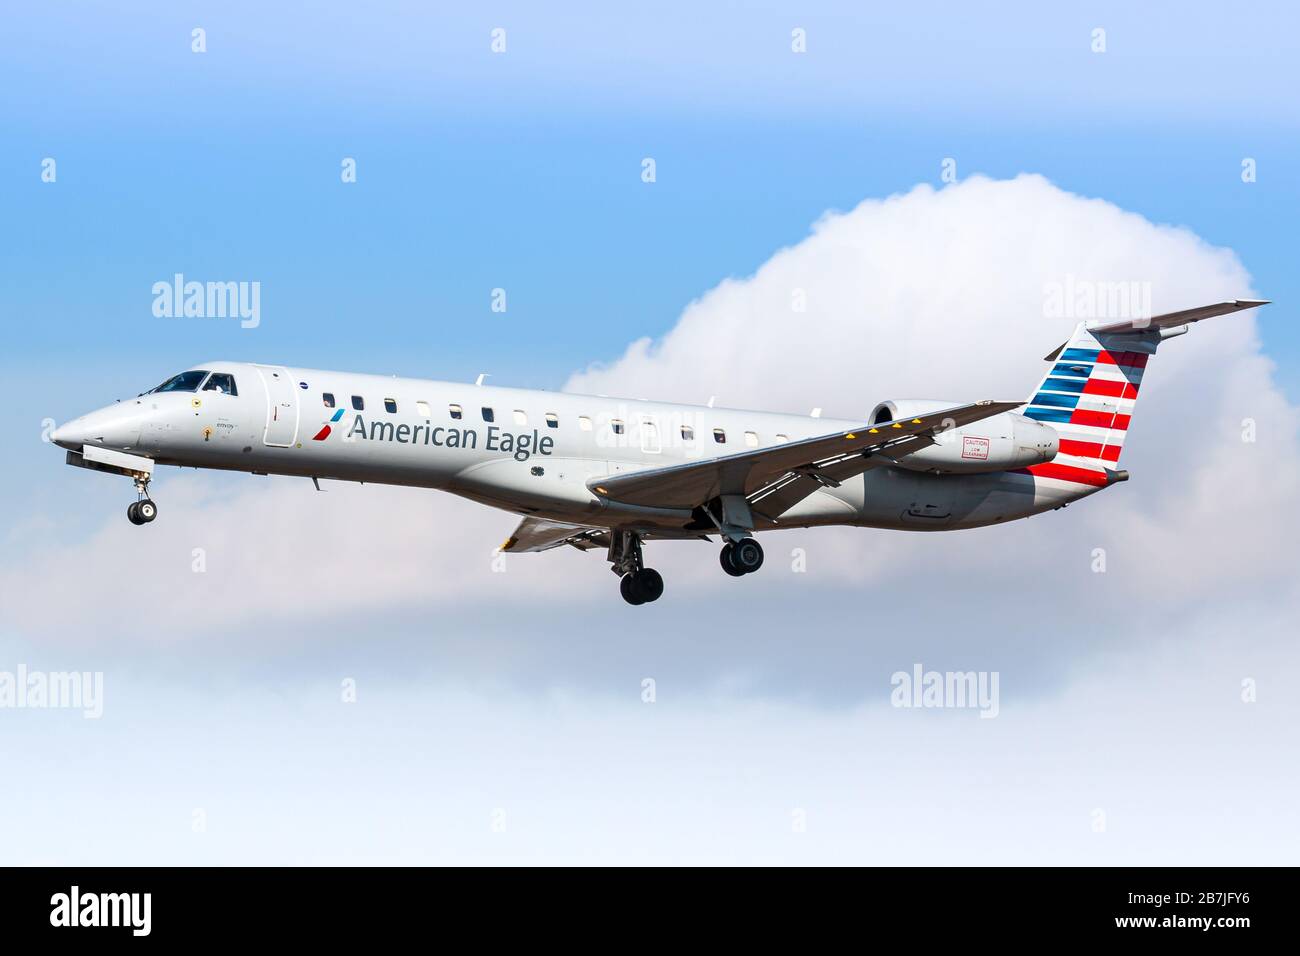 New York, USA - February 29, 2020: American Eagle Embraer ERJ-145 airplane at New York John F. Kennedy airport (JFK) in the USA. Embraer is an aircraf Stock Photo